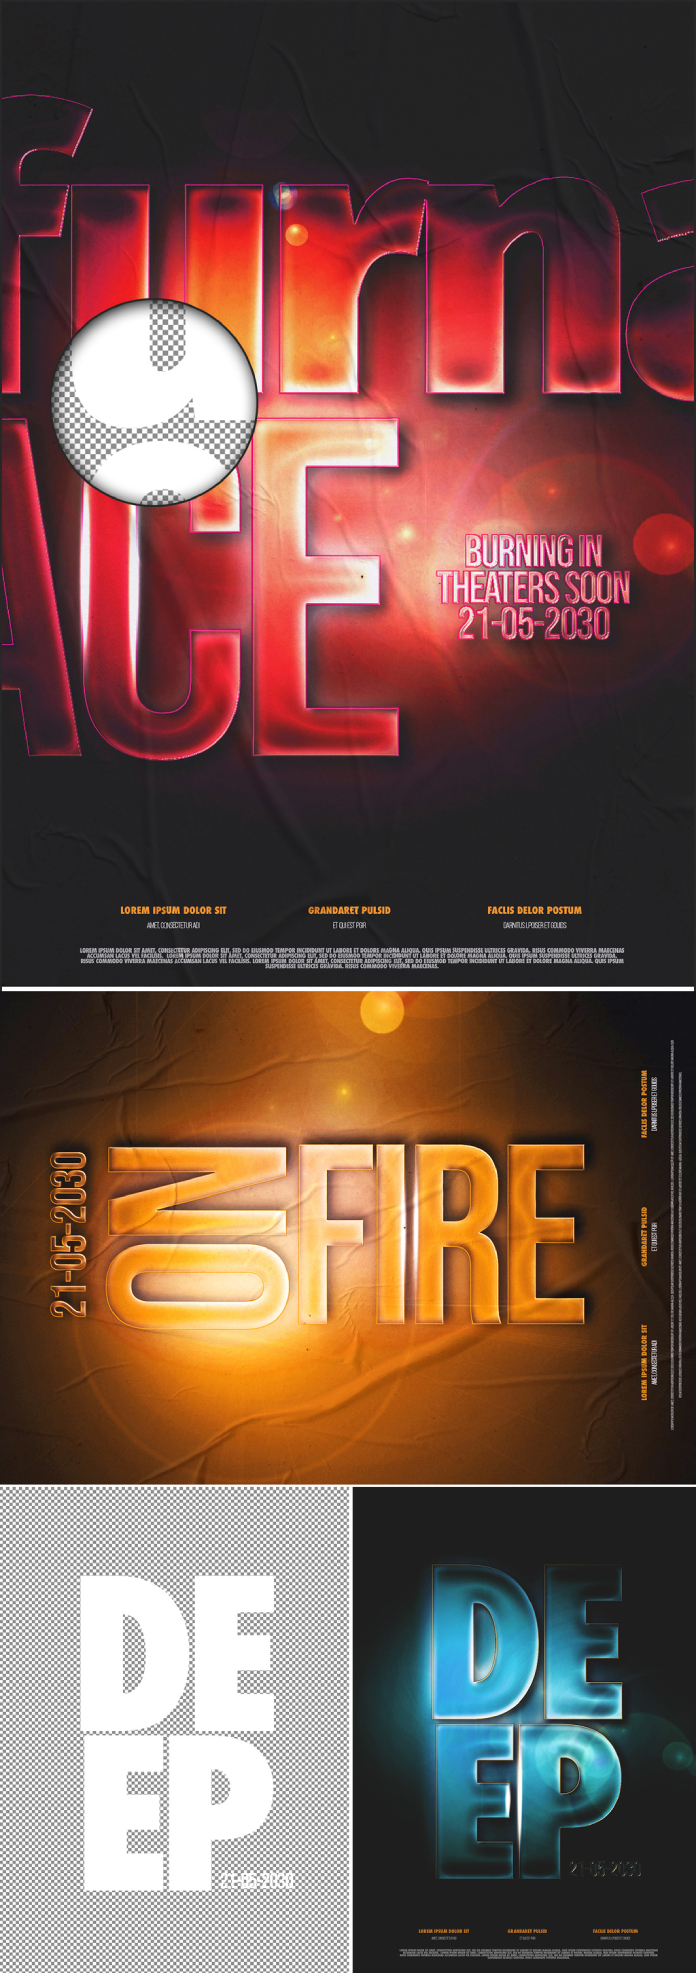 Movie Text Effect Poster Design Template for Adobe Photoshop